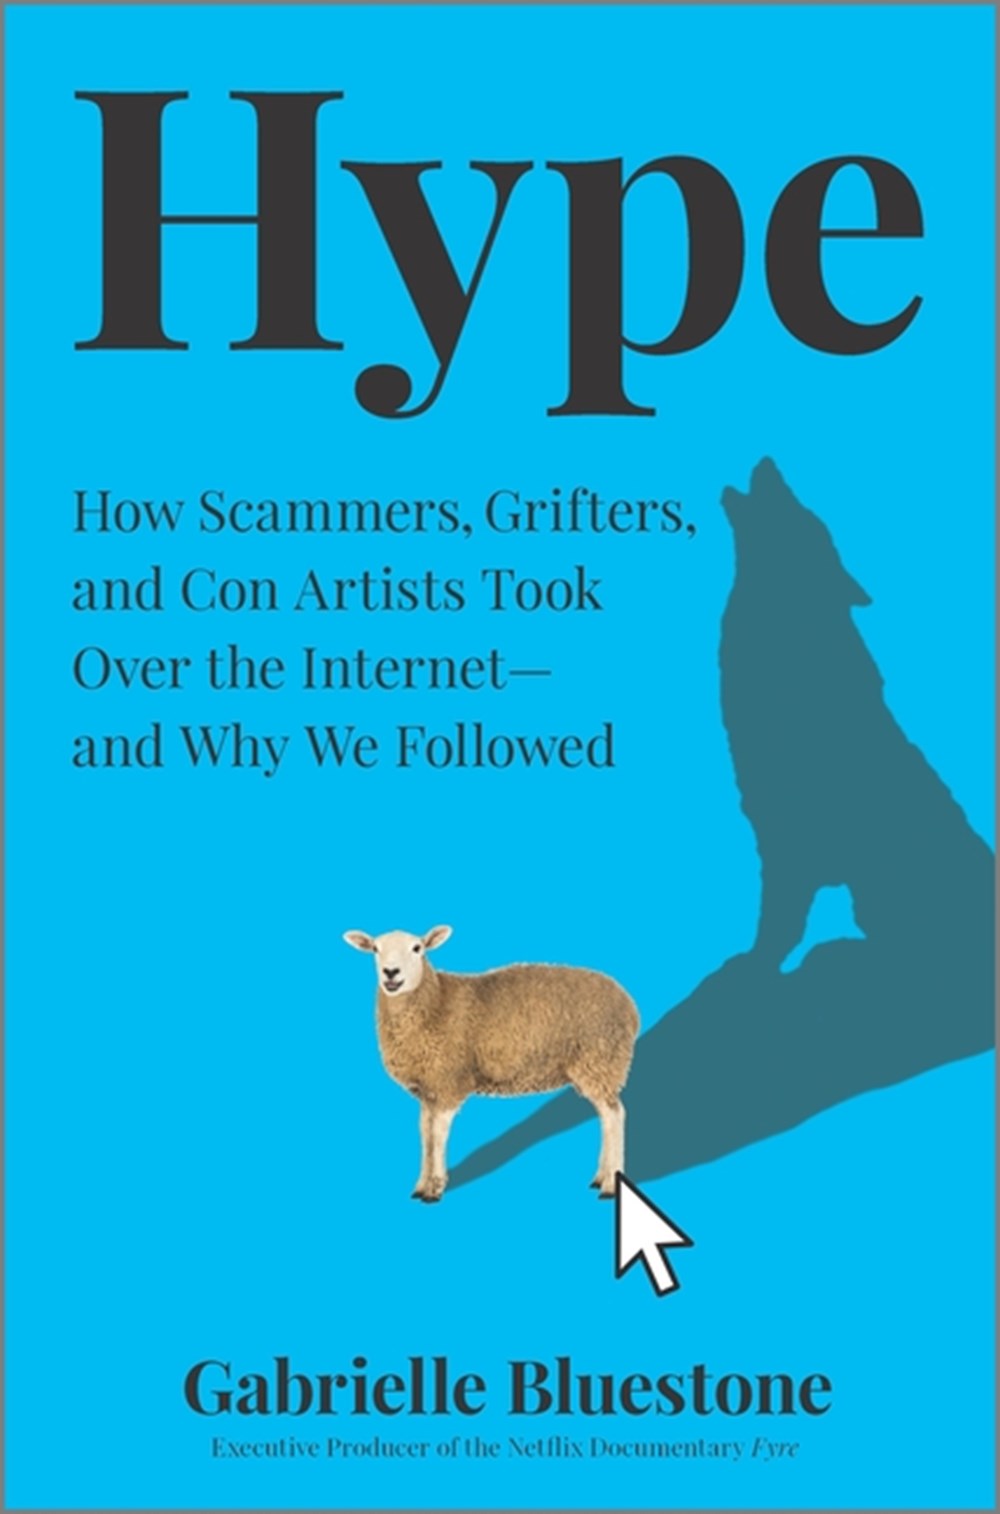 Hype How Scammers, Grifters, and Con Artists Took Over the Internet--And Why We're Following